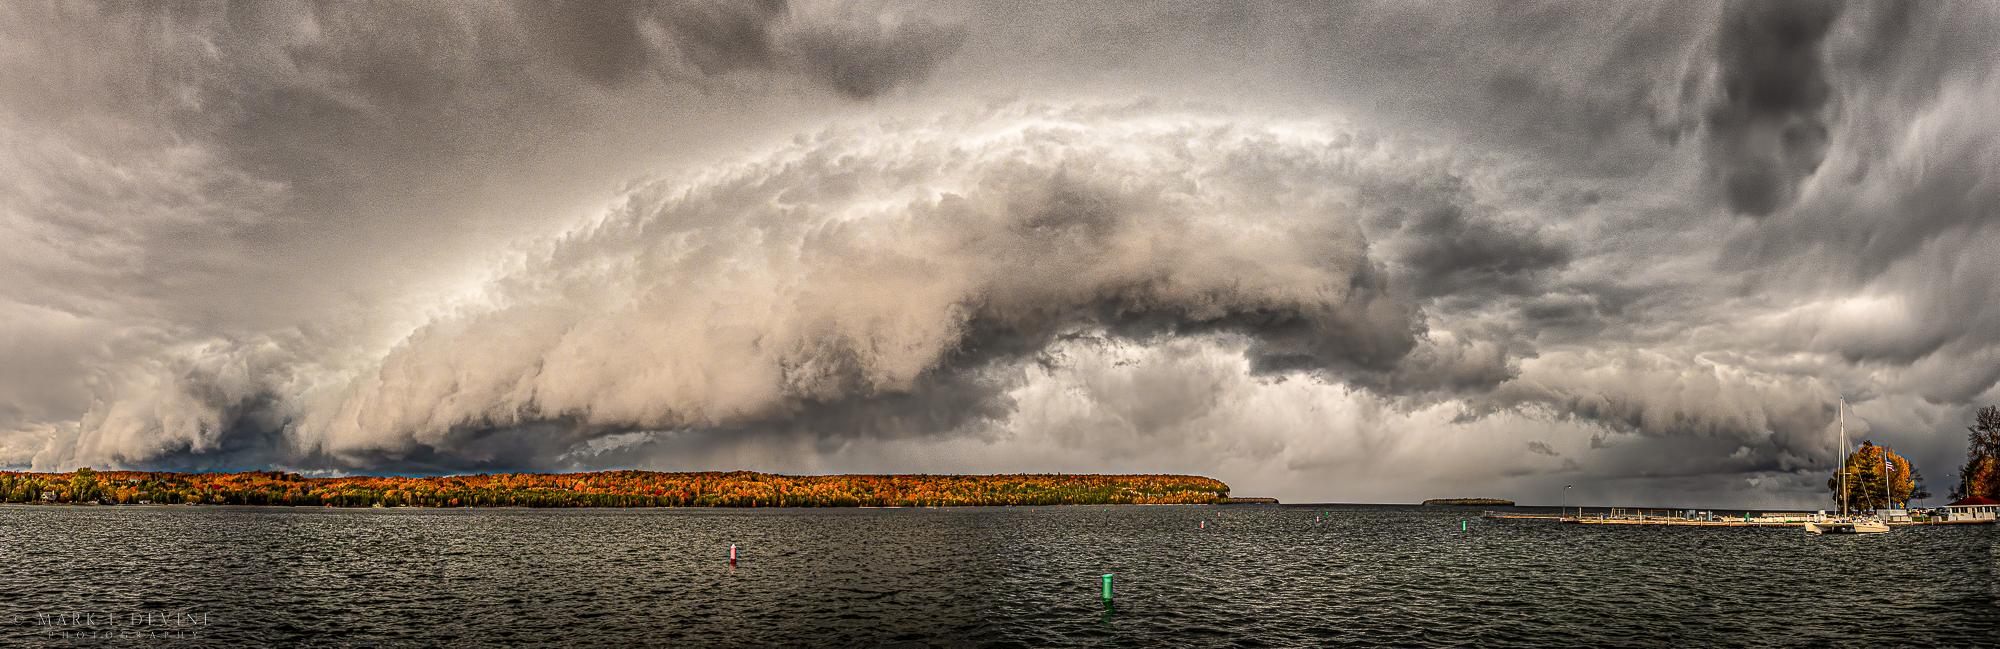 Storm front approaching Eagle Harbor in Ephraim, Wisconsin